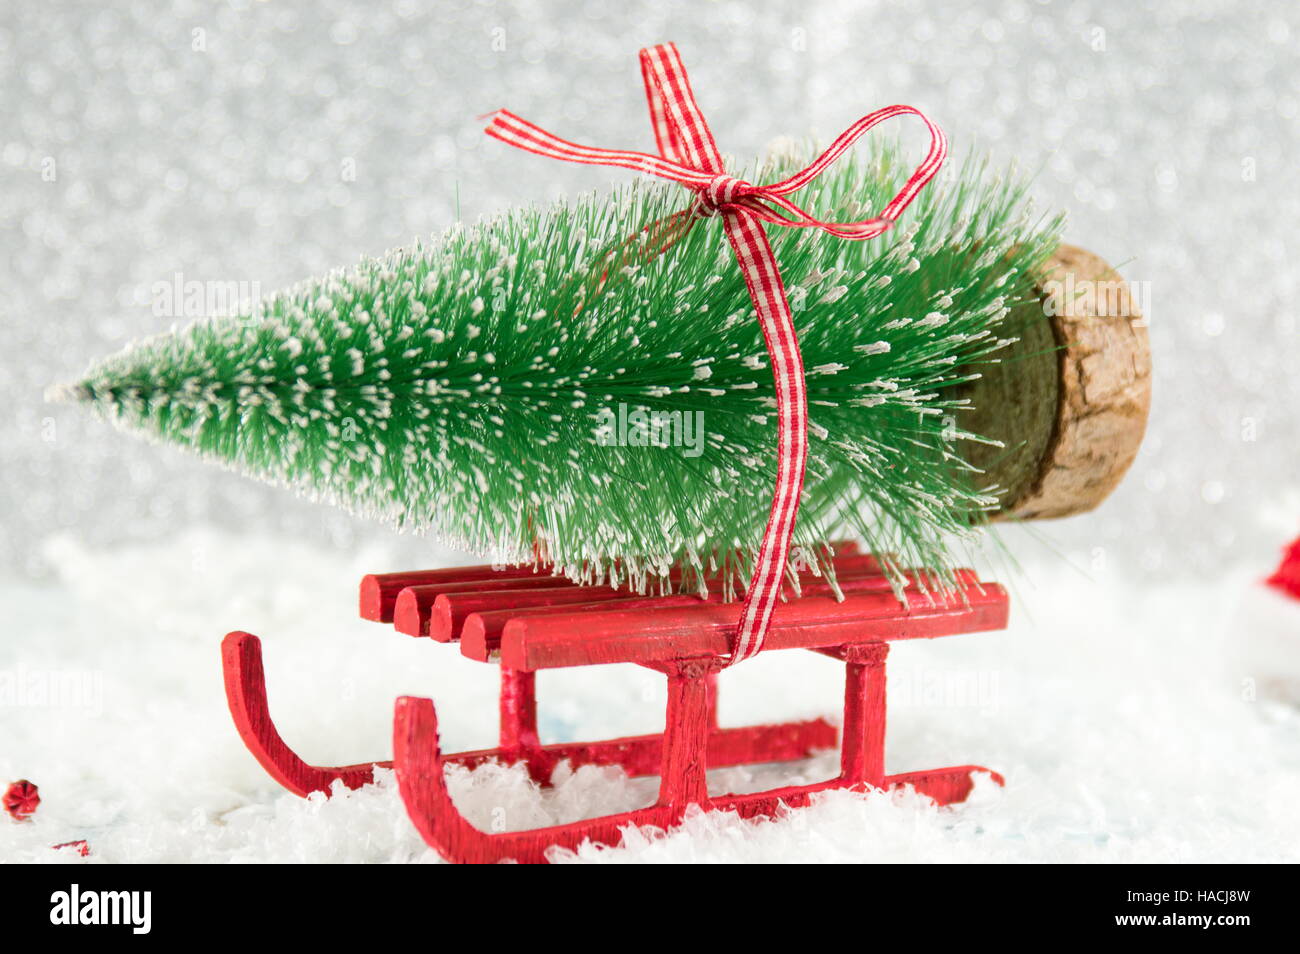 Red winter sleigh carrying a small Christmas tree Stock Photo